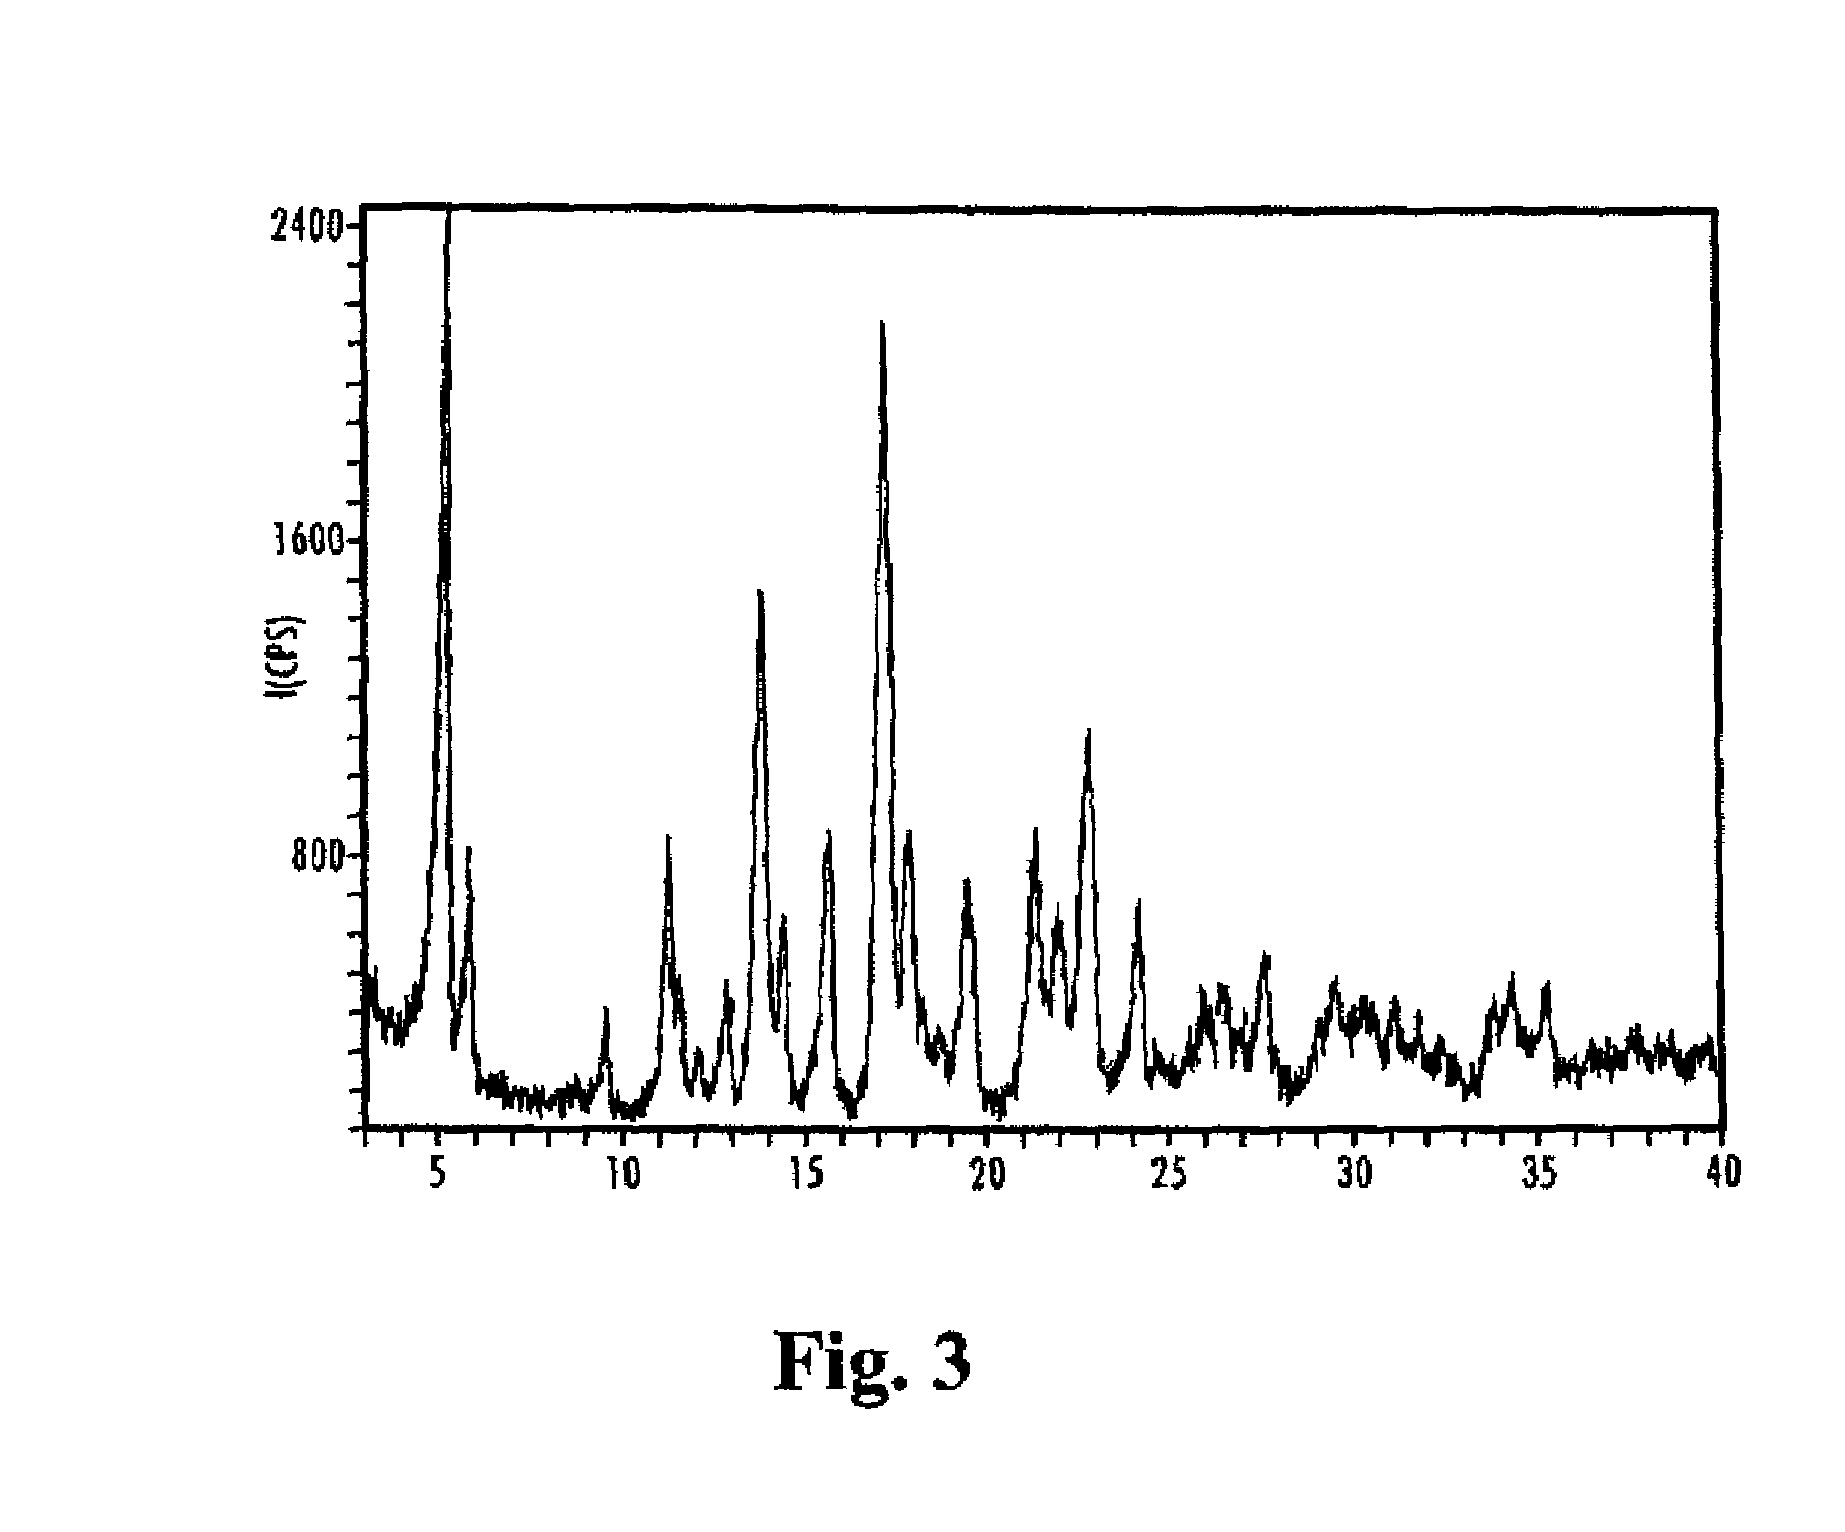 Sweetener Compositions Having Enhanced Sweetness and Improved Temporal and/or Flavor Profiles